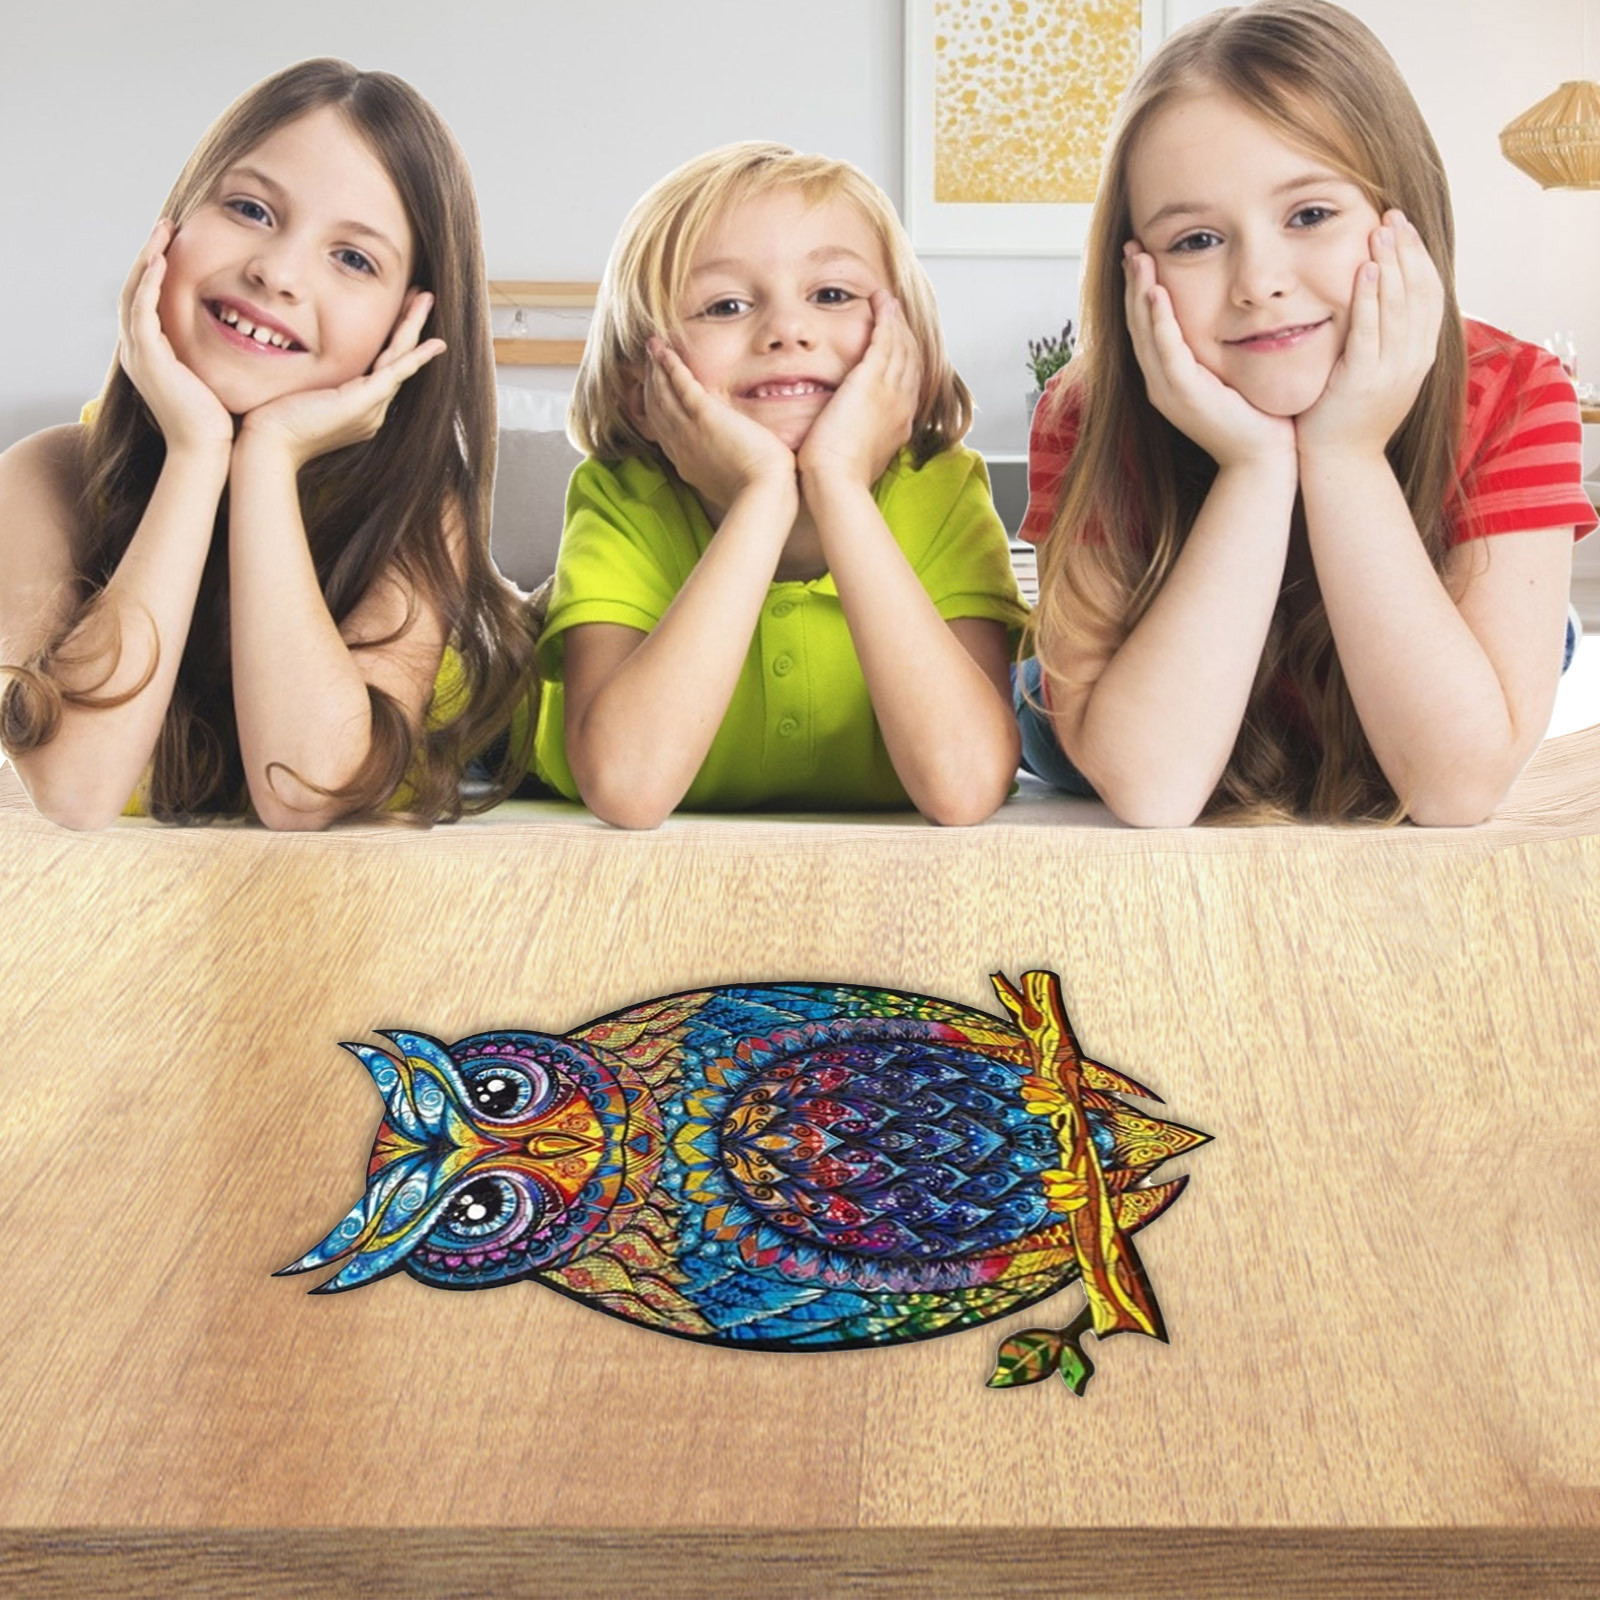 The Owl Wooden Puzzle Unique Shape Pieces Animal Gift For Adults And Kids 122 Pieces Wooden Wooden Puzzle Pieces Educational